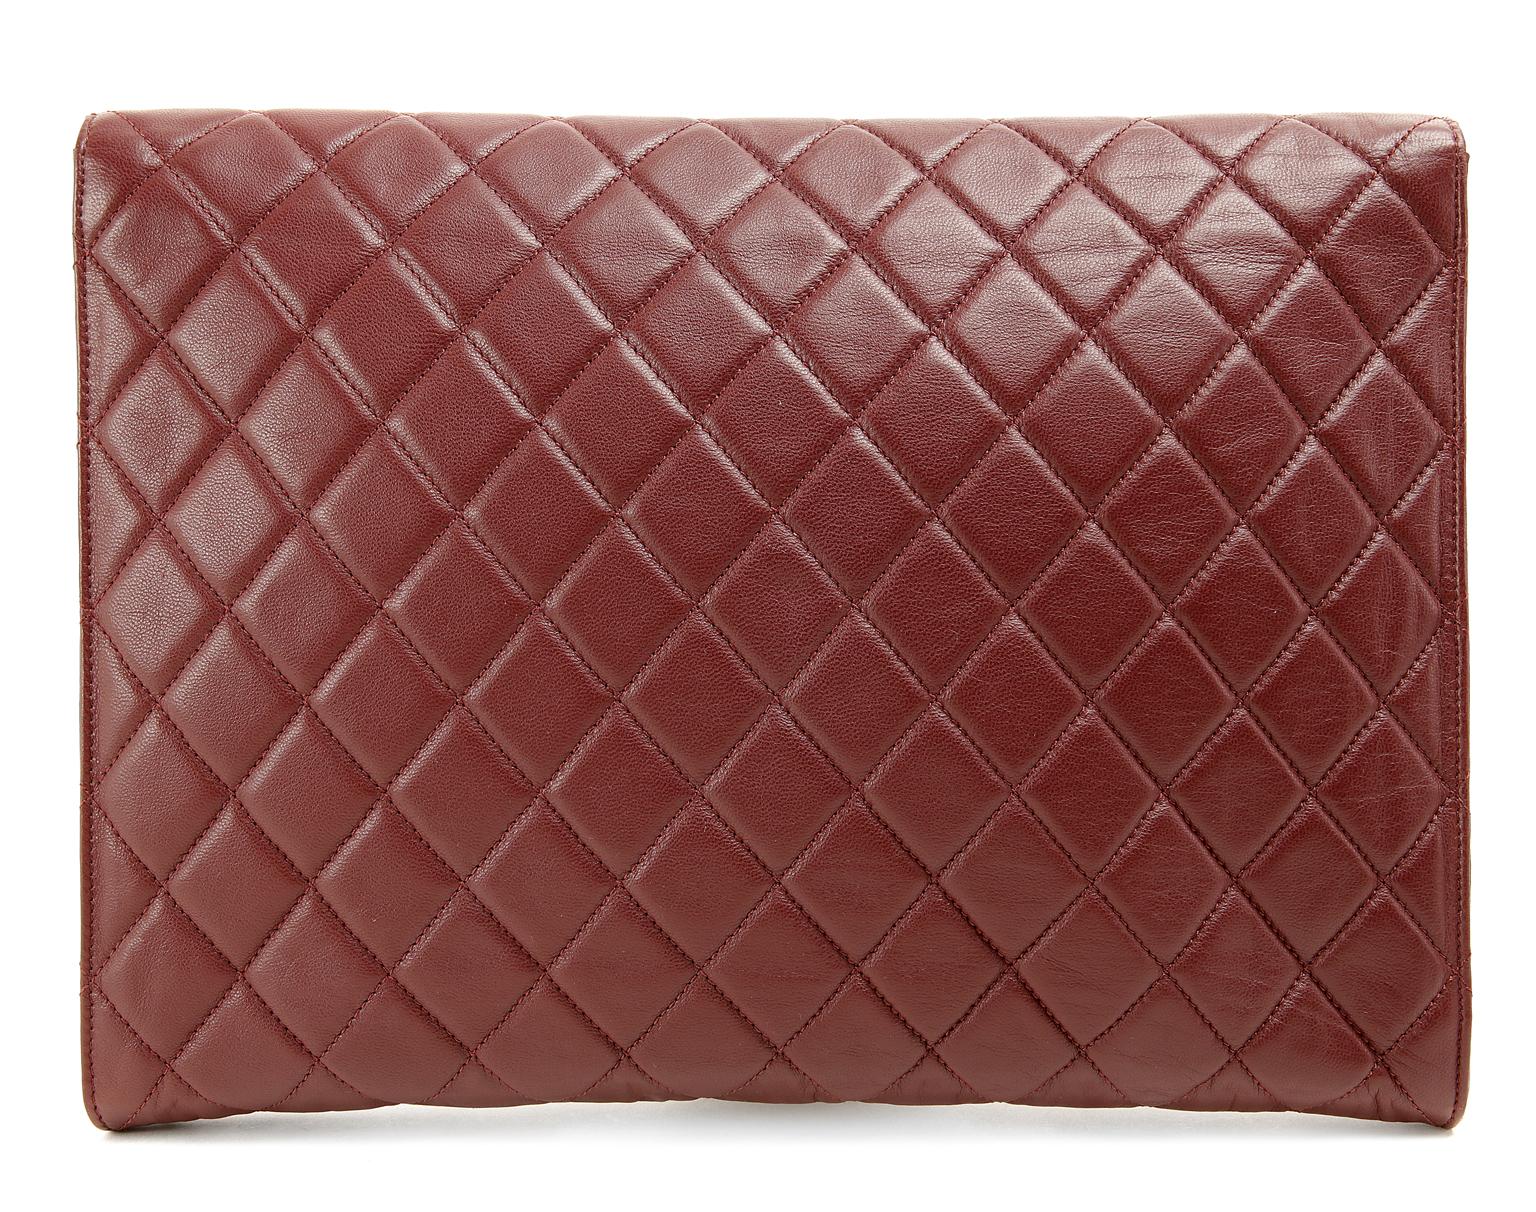 Chanel Bordeaux Leather Oversized Clutch- Pristine; appears never carried A gloriously chic document holder or a strikingly beautiful clutch, this Chanel is a versatile addition to any collection. Bordeaux wine leather oversized clutch is quilted in